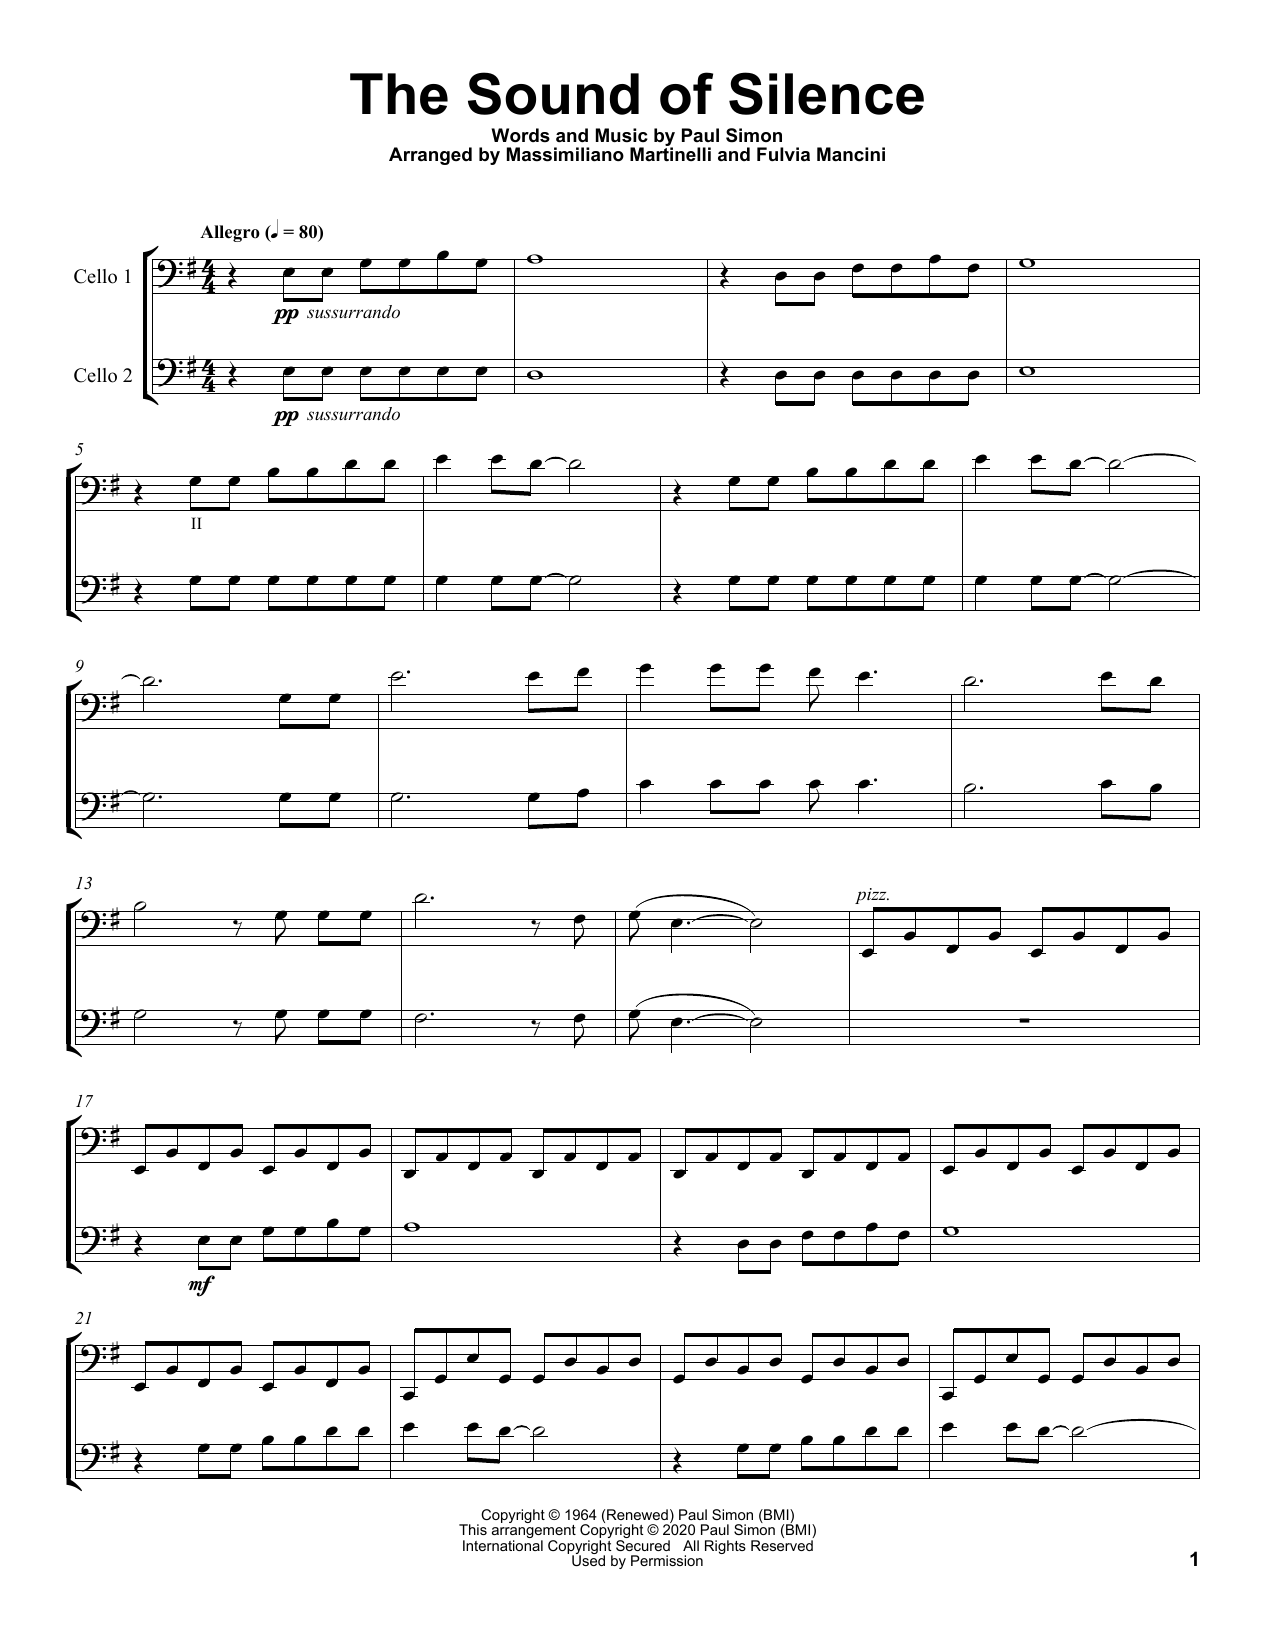 Download Mr. & Mrs. Cello The Sound Of Silence Sheet Music